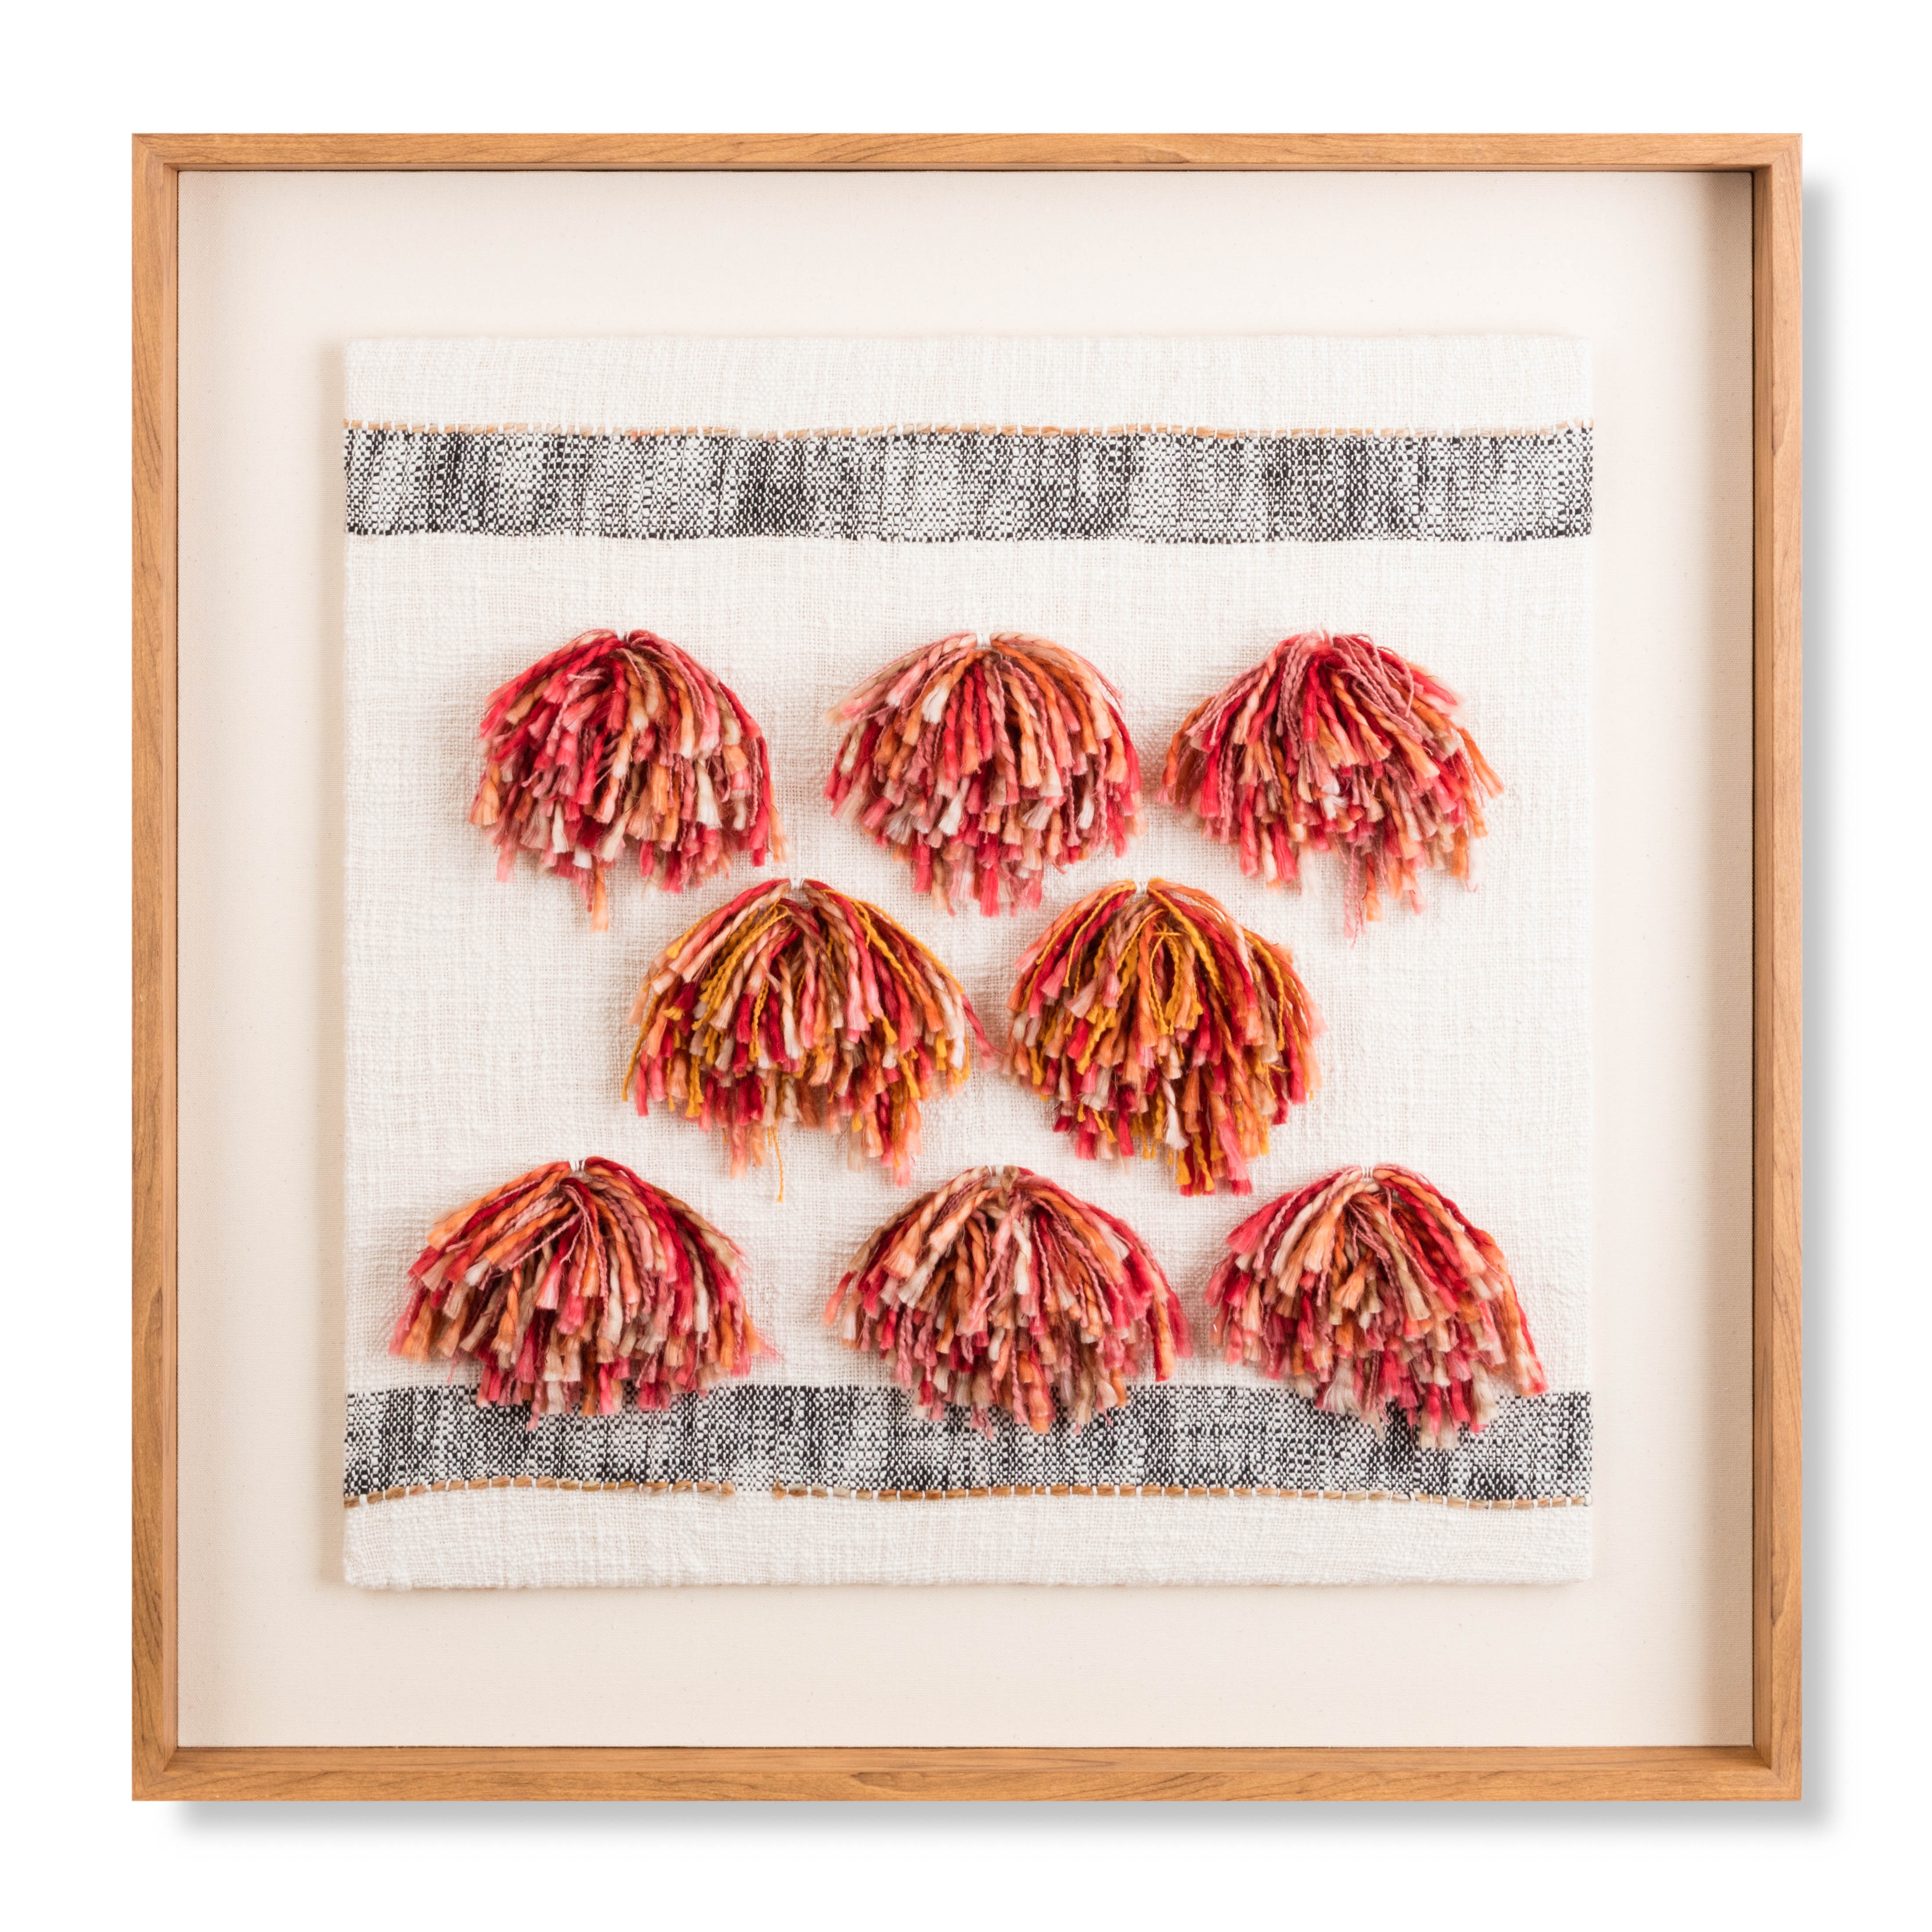 WOOD FRAME OPUNT RED 2'-4" x 2'-4" WALL ART - Image 0